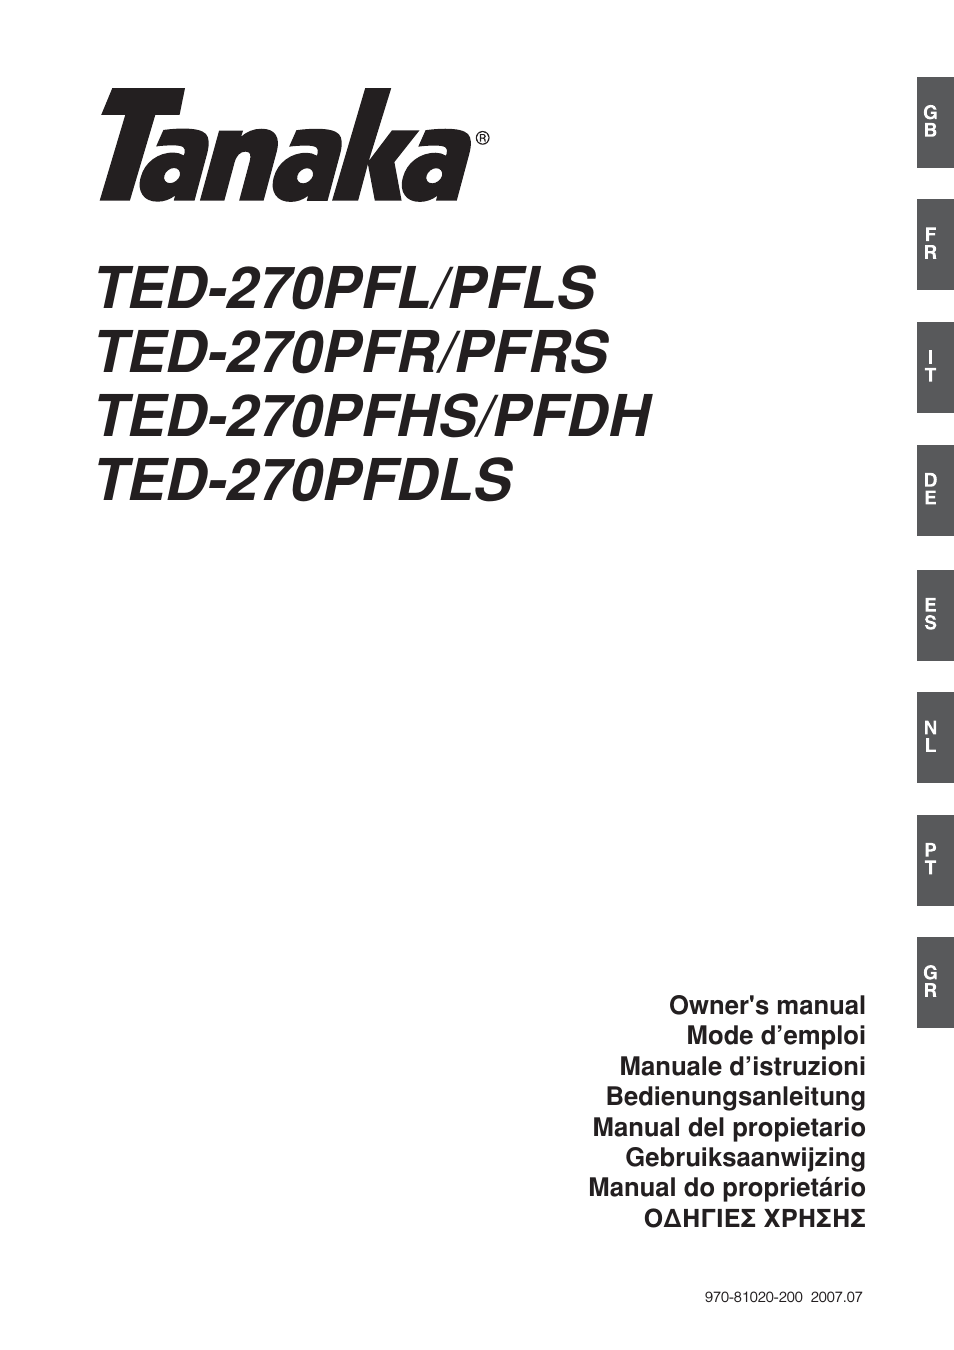 TED-270PFL